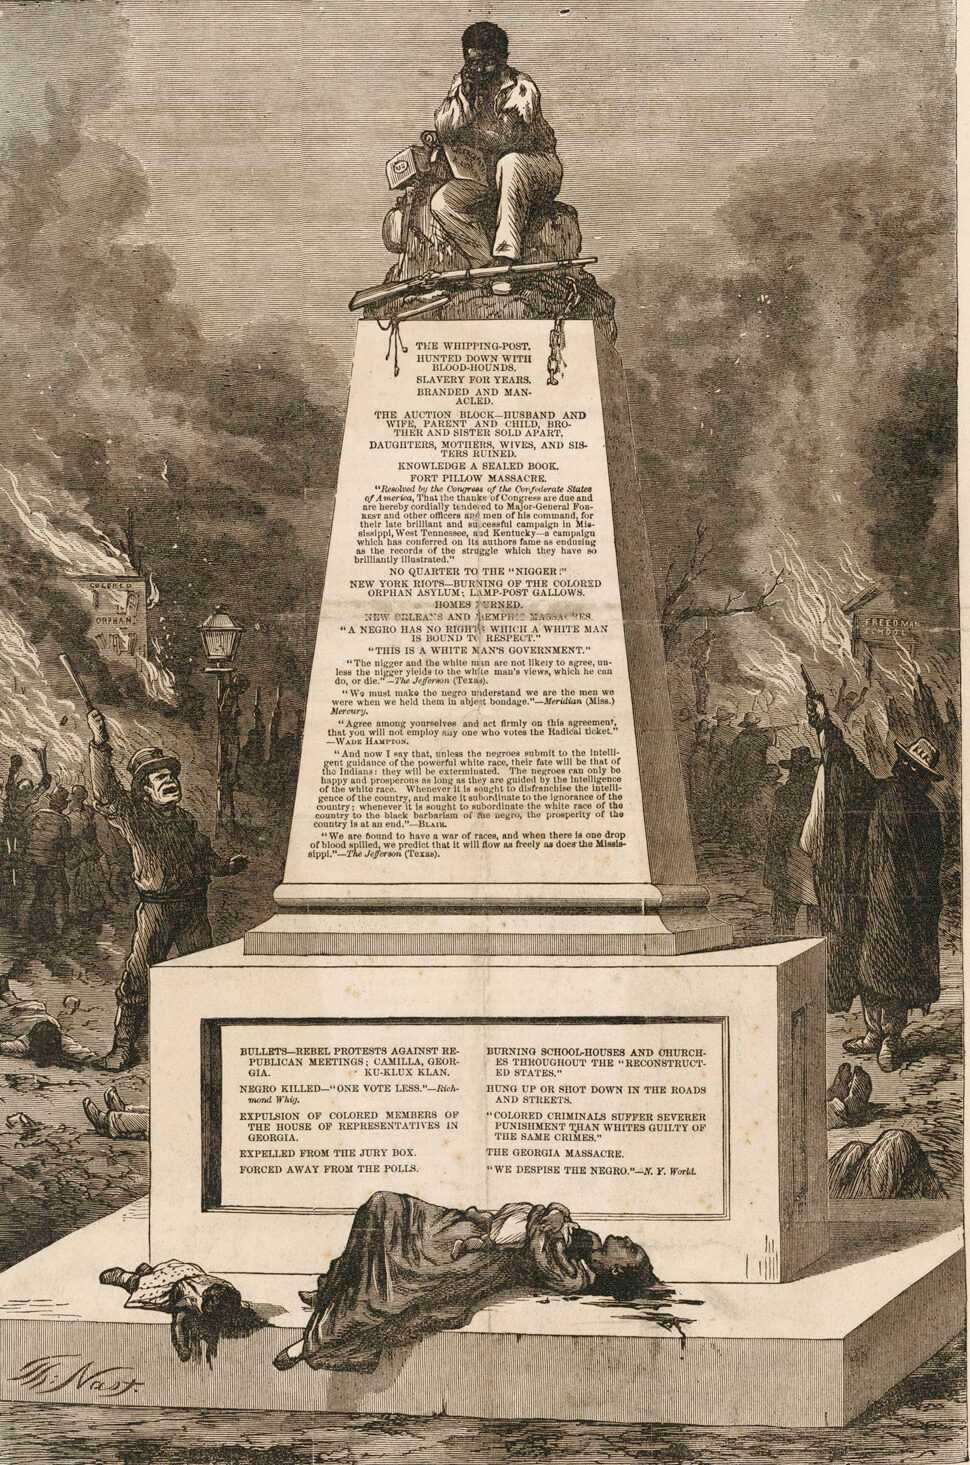 A rare broadside supplement to the Cincinnati Gazette, "Patience on a Monument," shows a freed slave sitting atop a monument that lists evils perpetrated against blacks. A dead woman and children lie at the bottom of the monument, while violence and fires rage in the background.